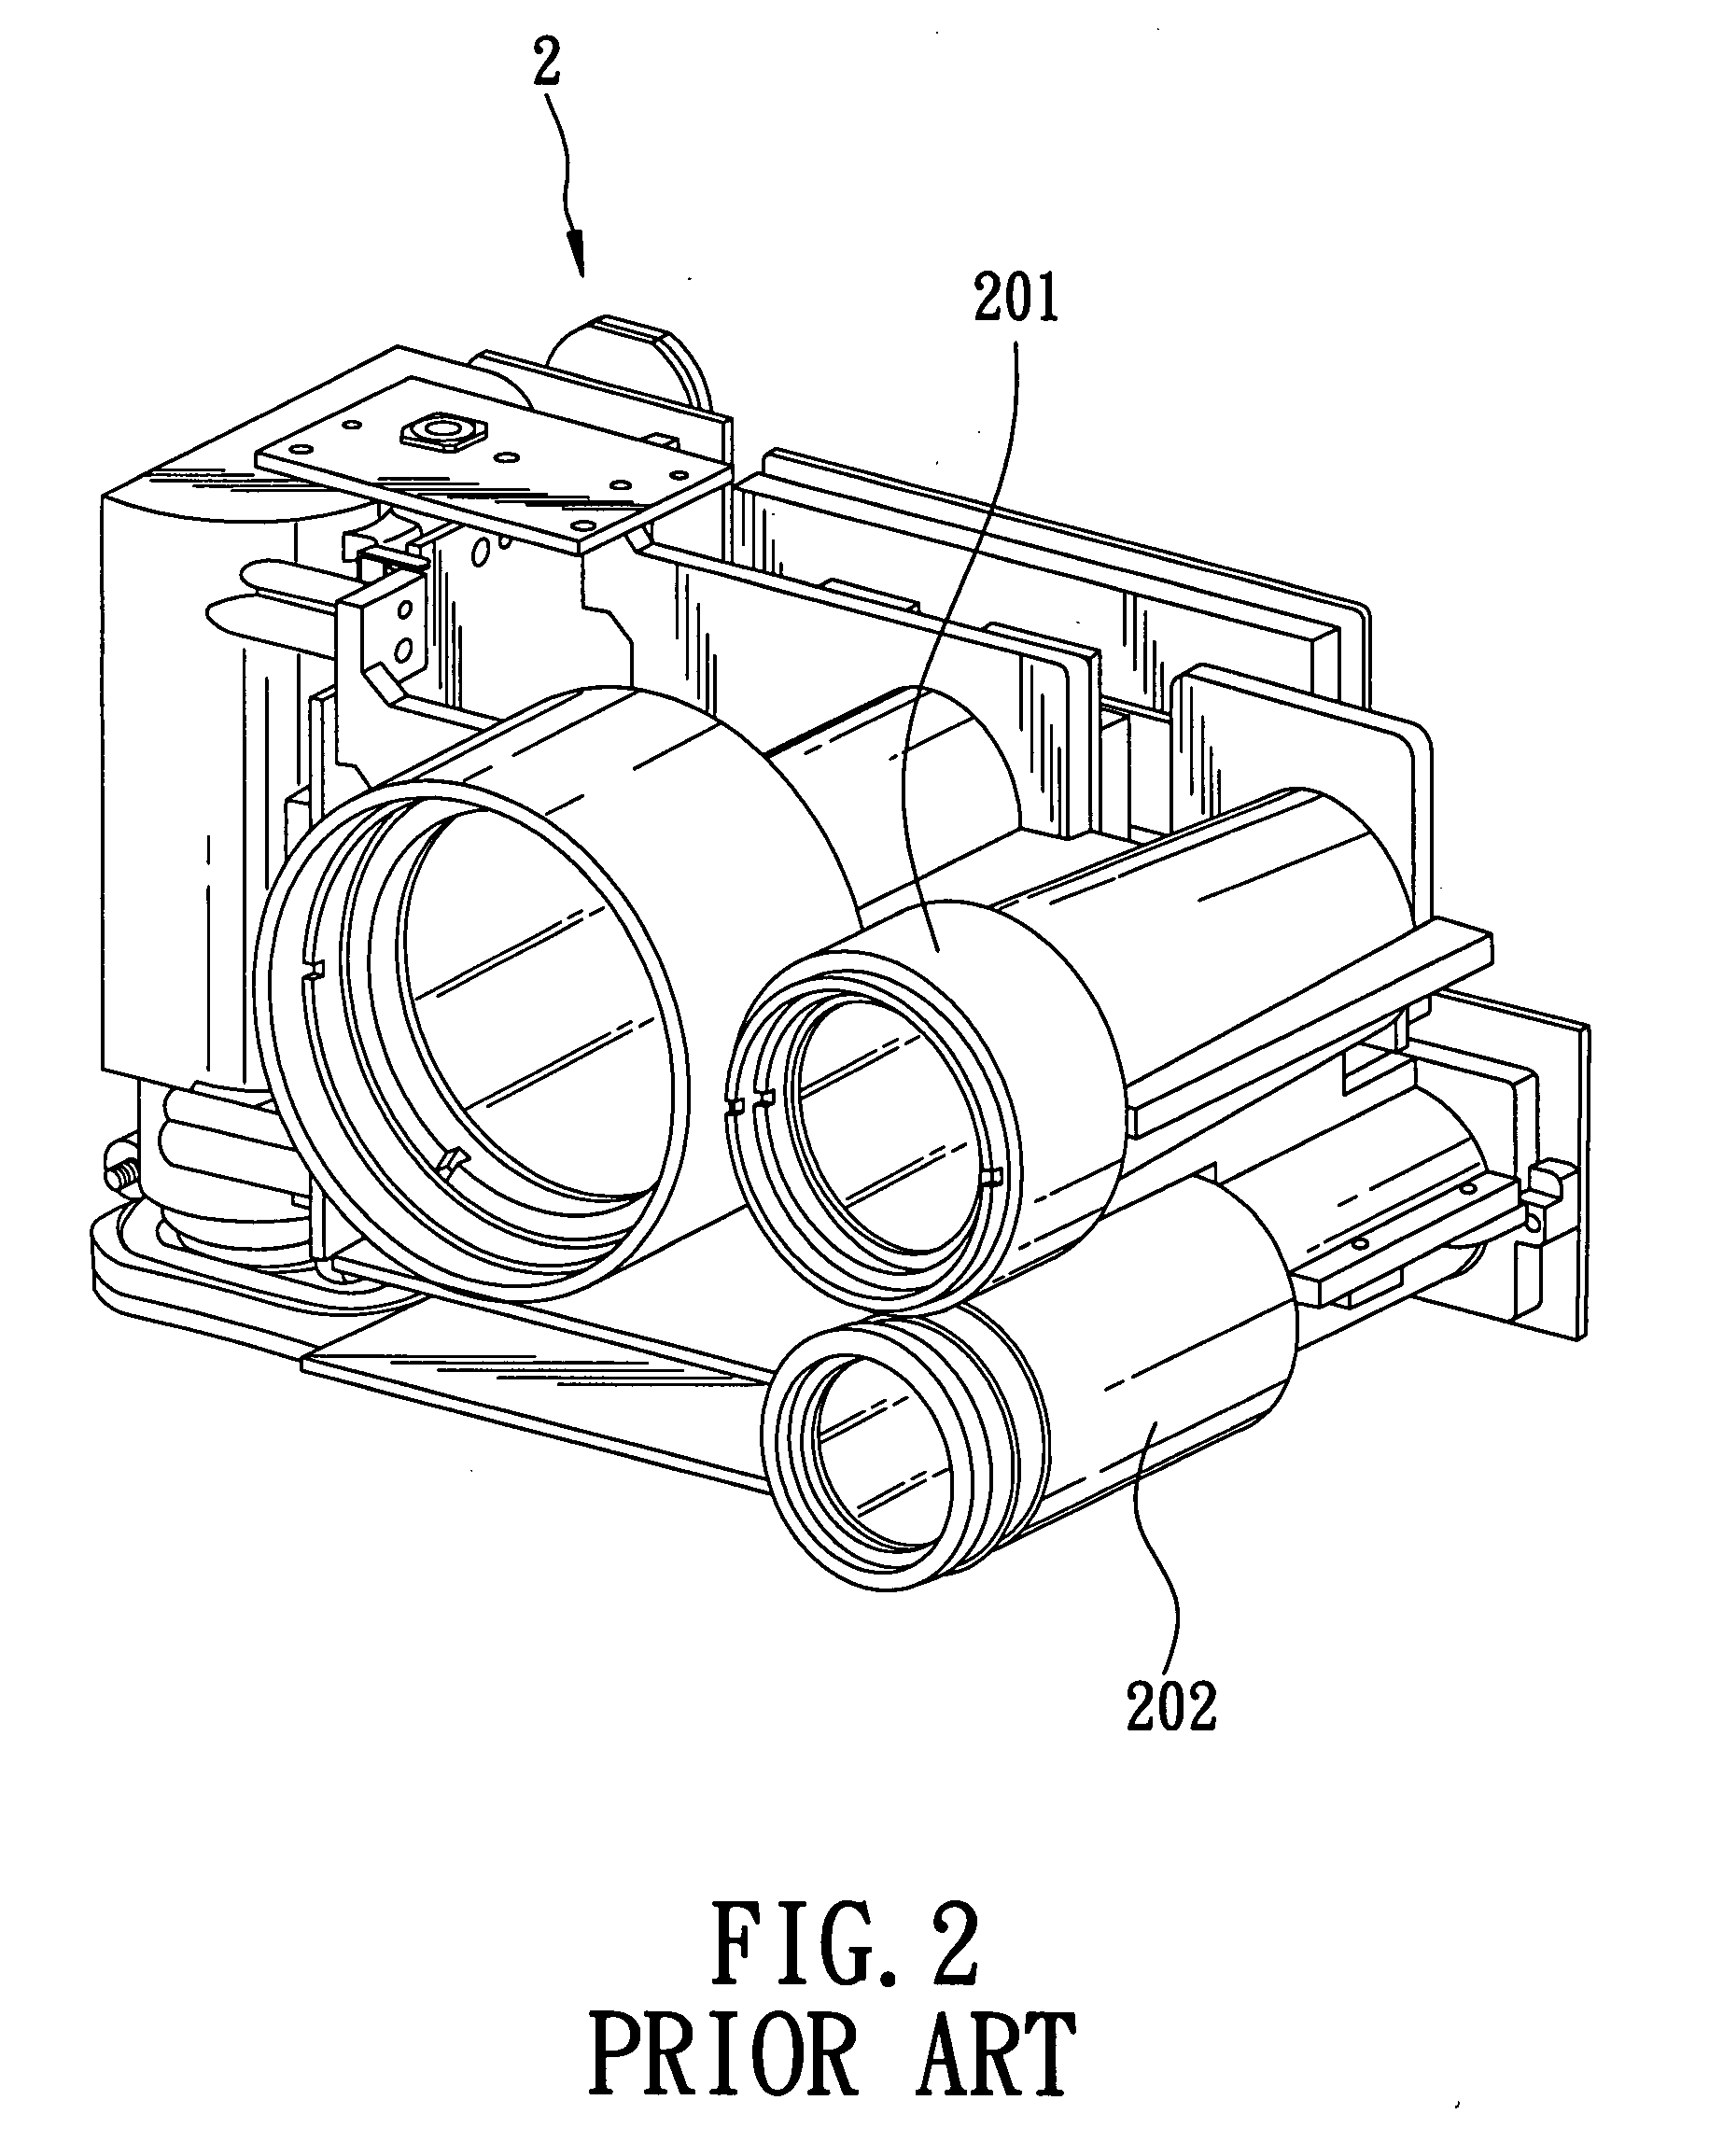 Method of distance estimation to be implemented using a digital camera